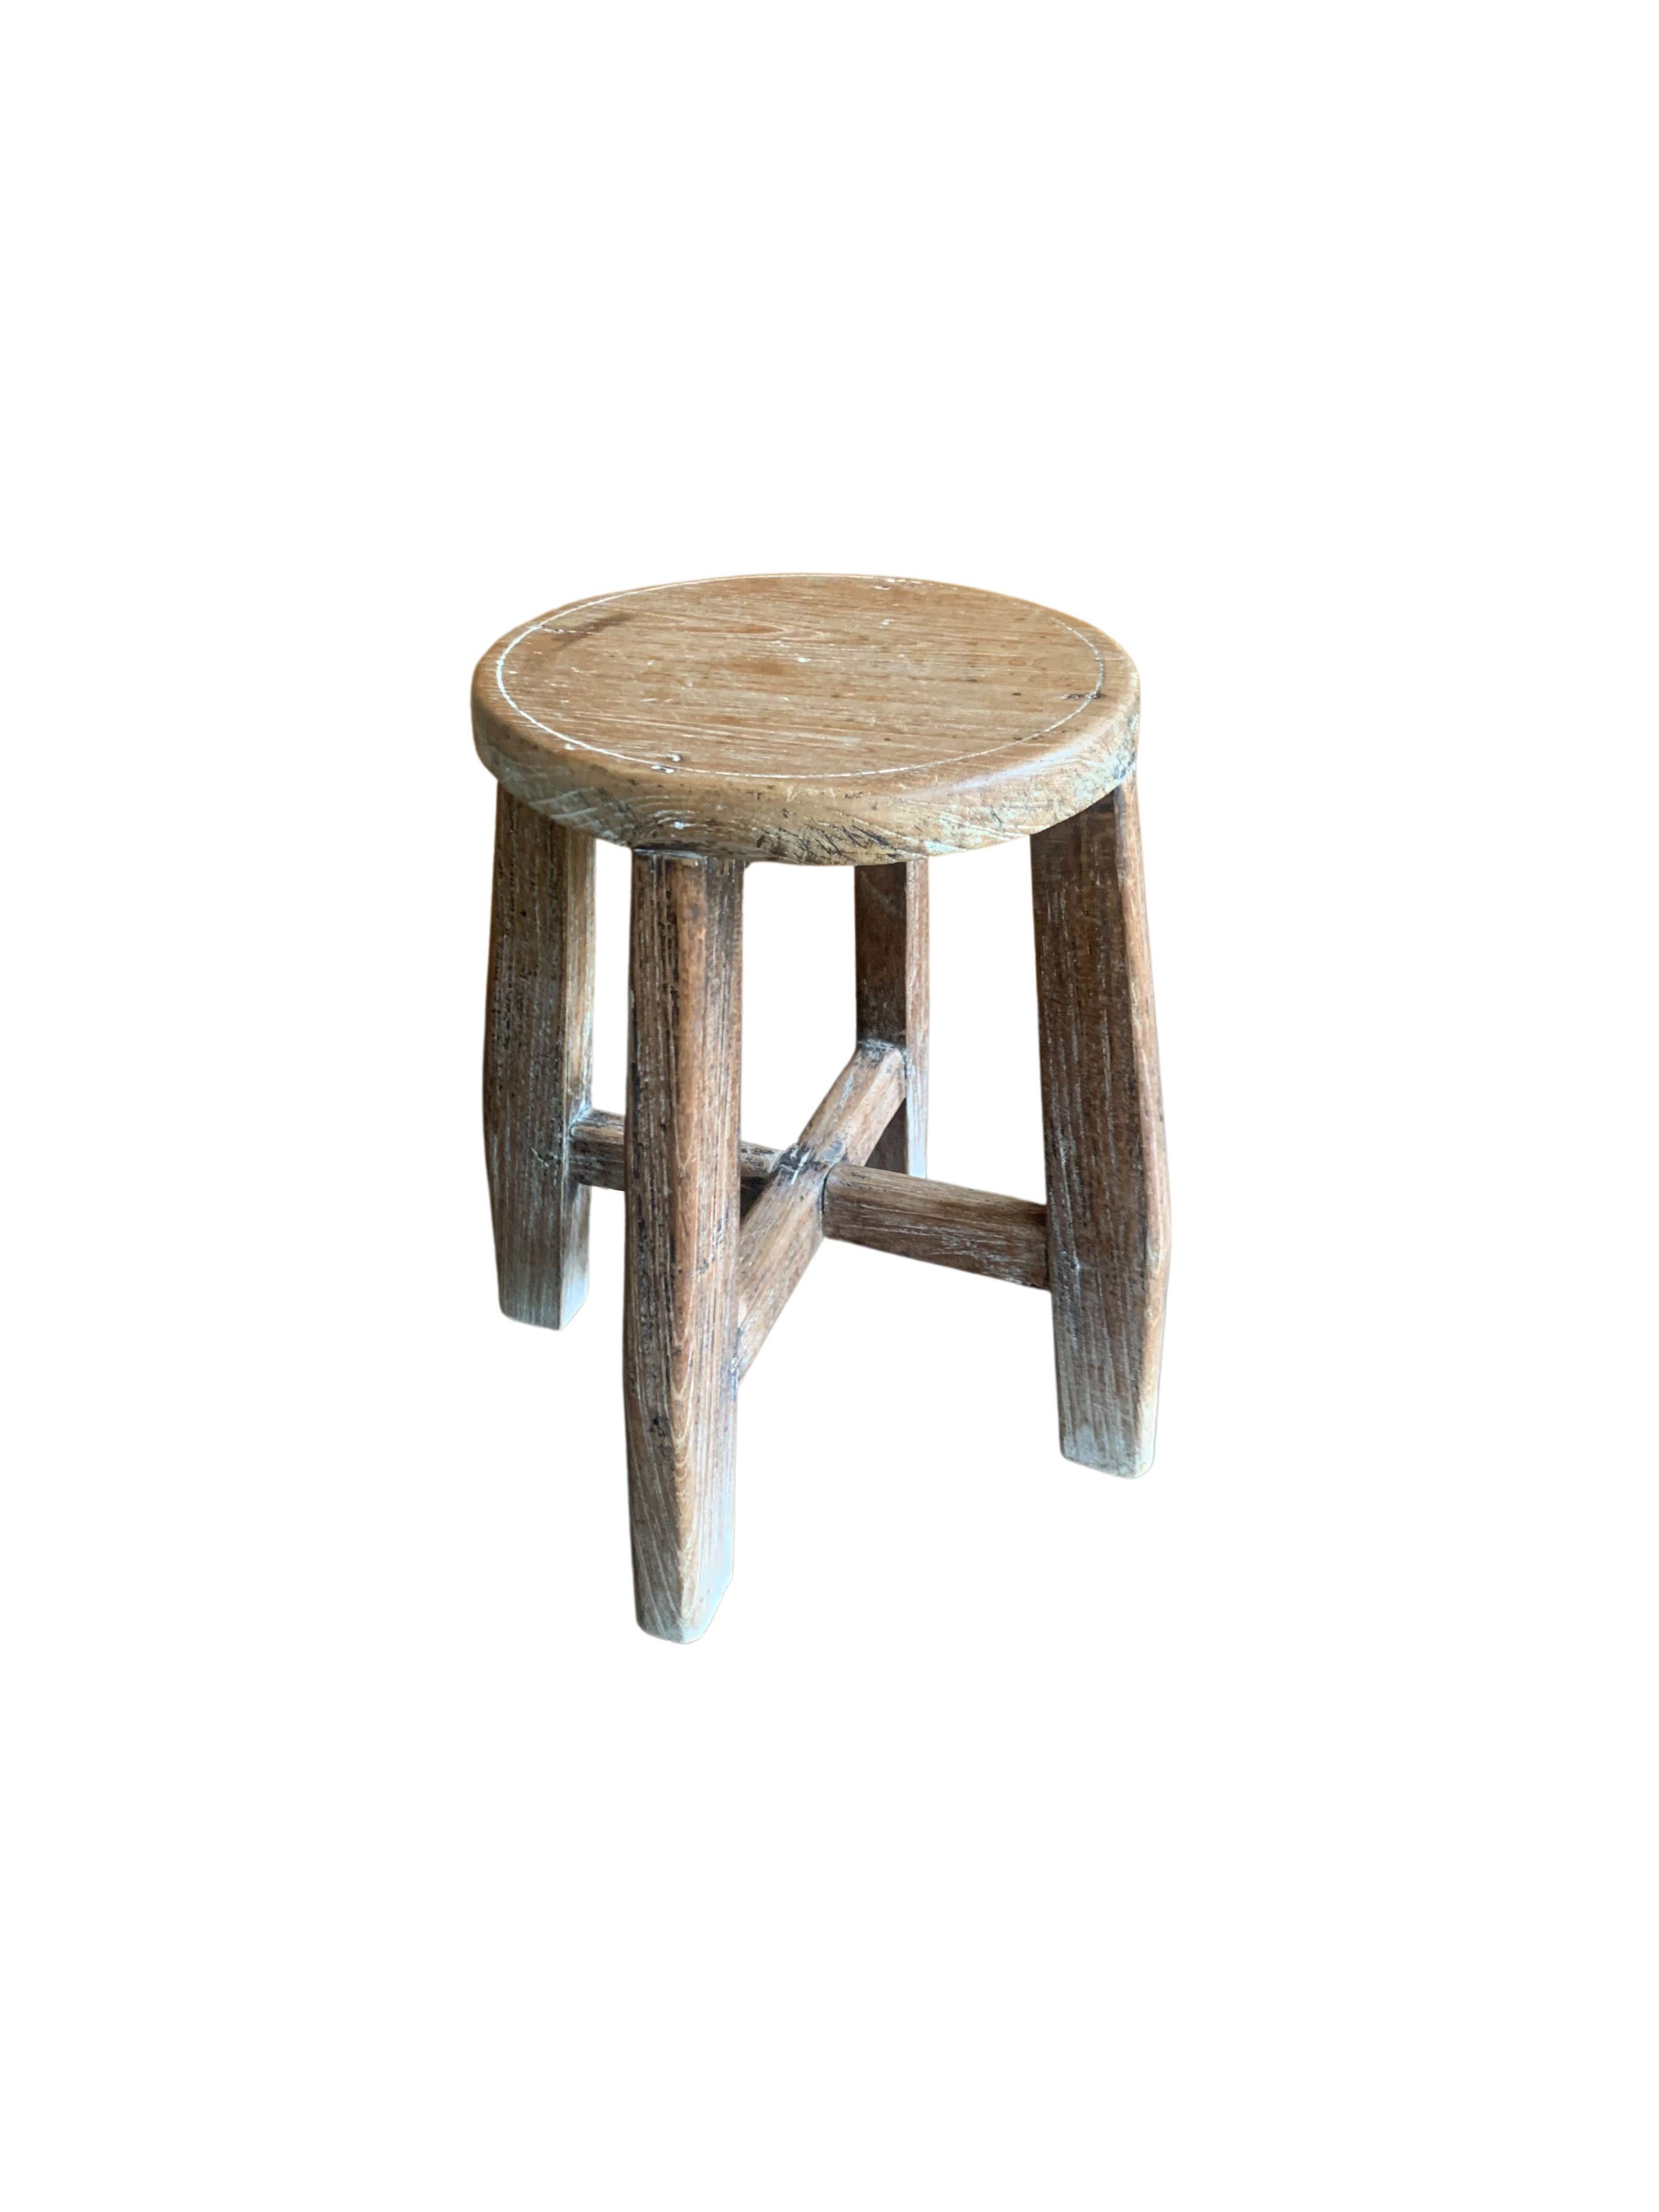 Other Vintage Chinese Elm Wood Stool For Sale